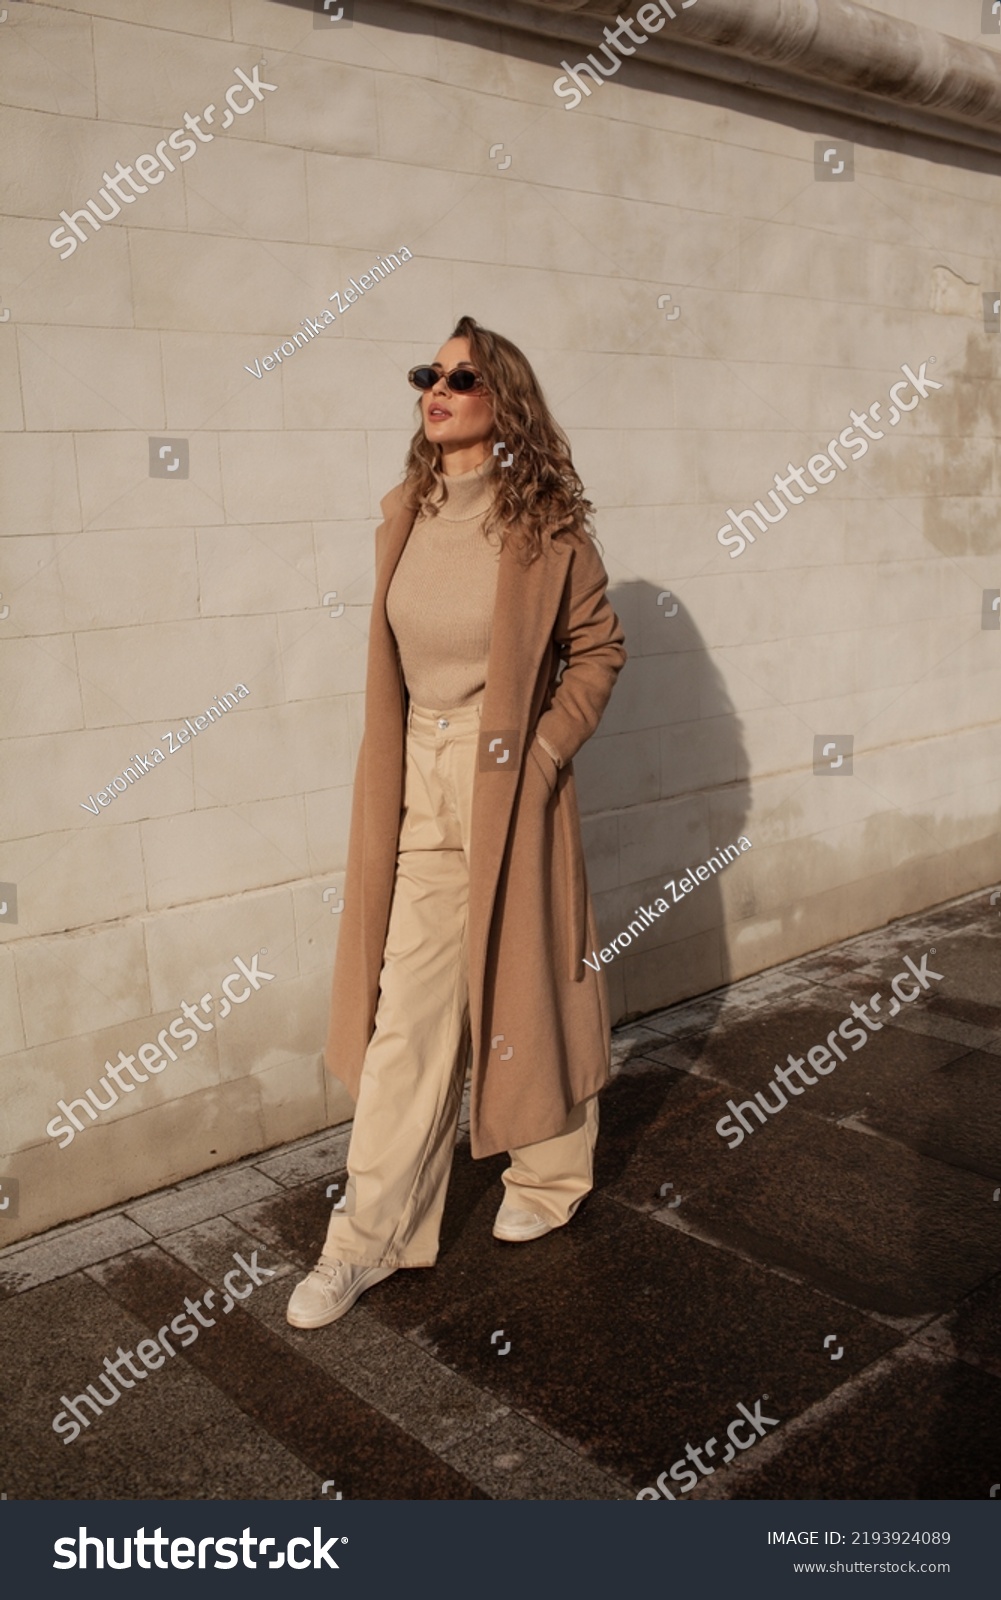 A style woman walking, enjoys a wonderful atmosphere of a vacation in fall time. The girl is wearing a urban beige sweater, sunglasses and resting against the background of the streets of the city #2193924089